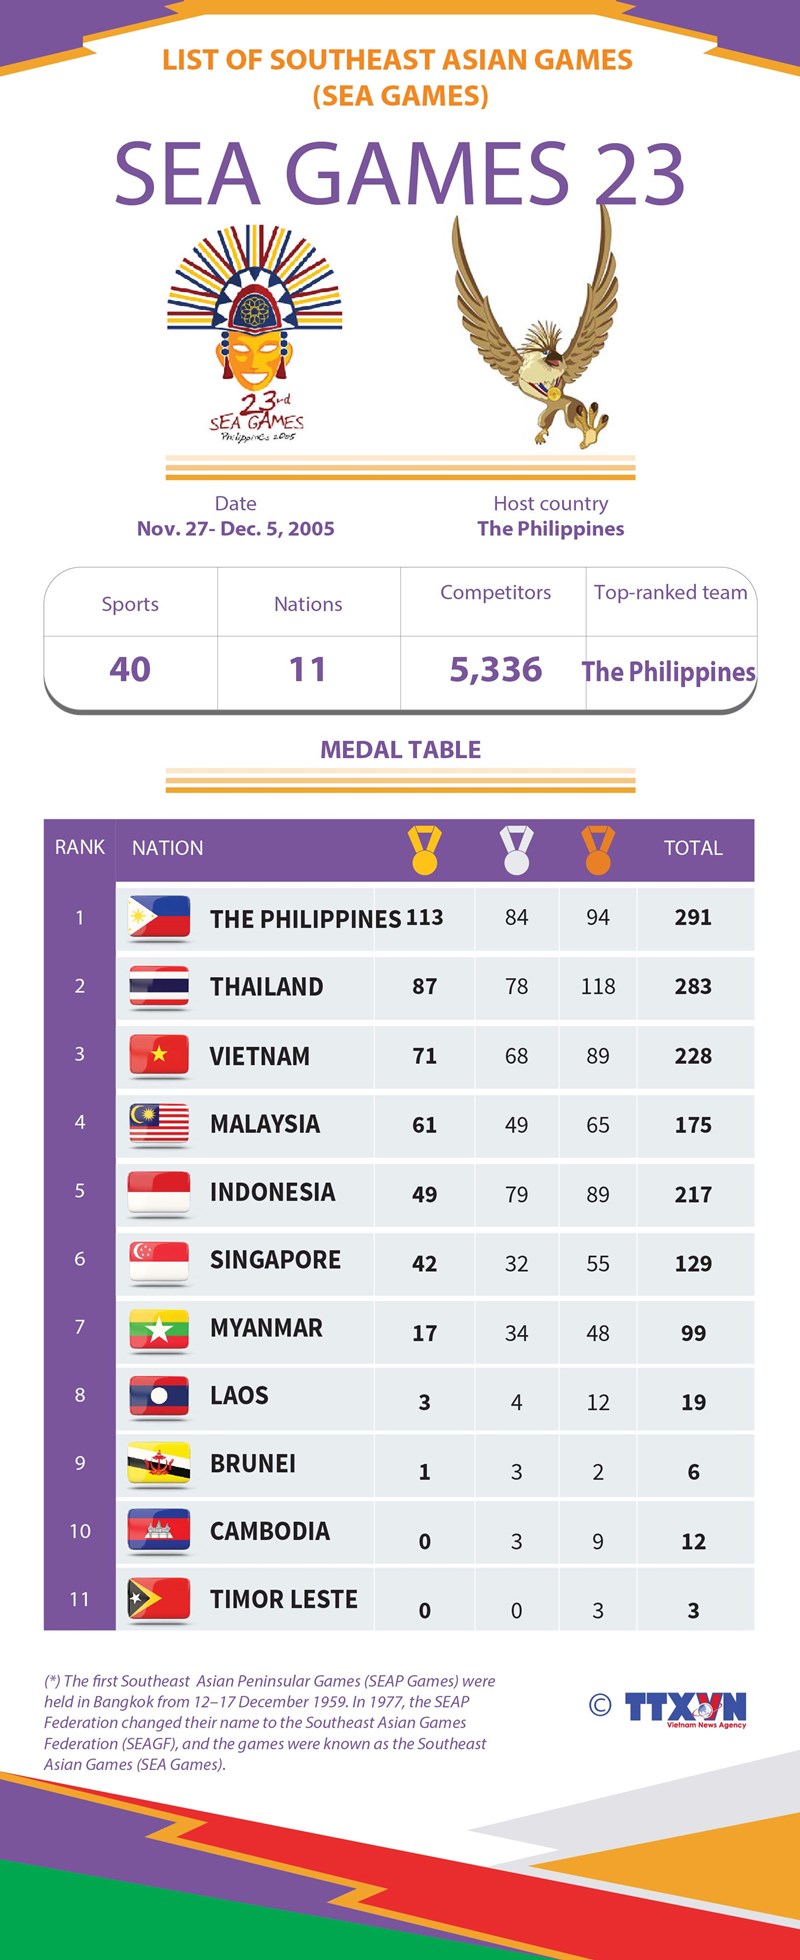 List of Southeast Asian Games: SEA Games 23 hinh anh 1